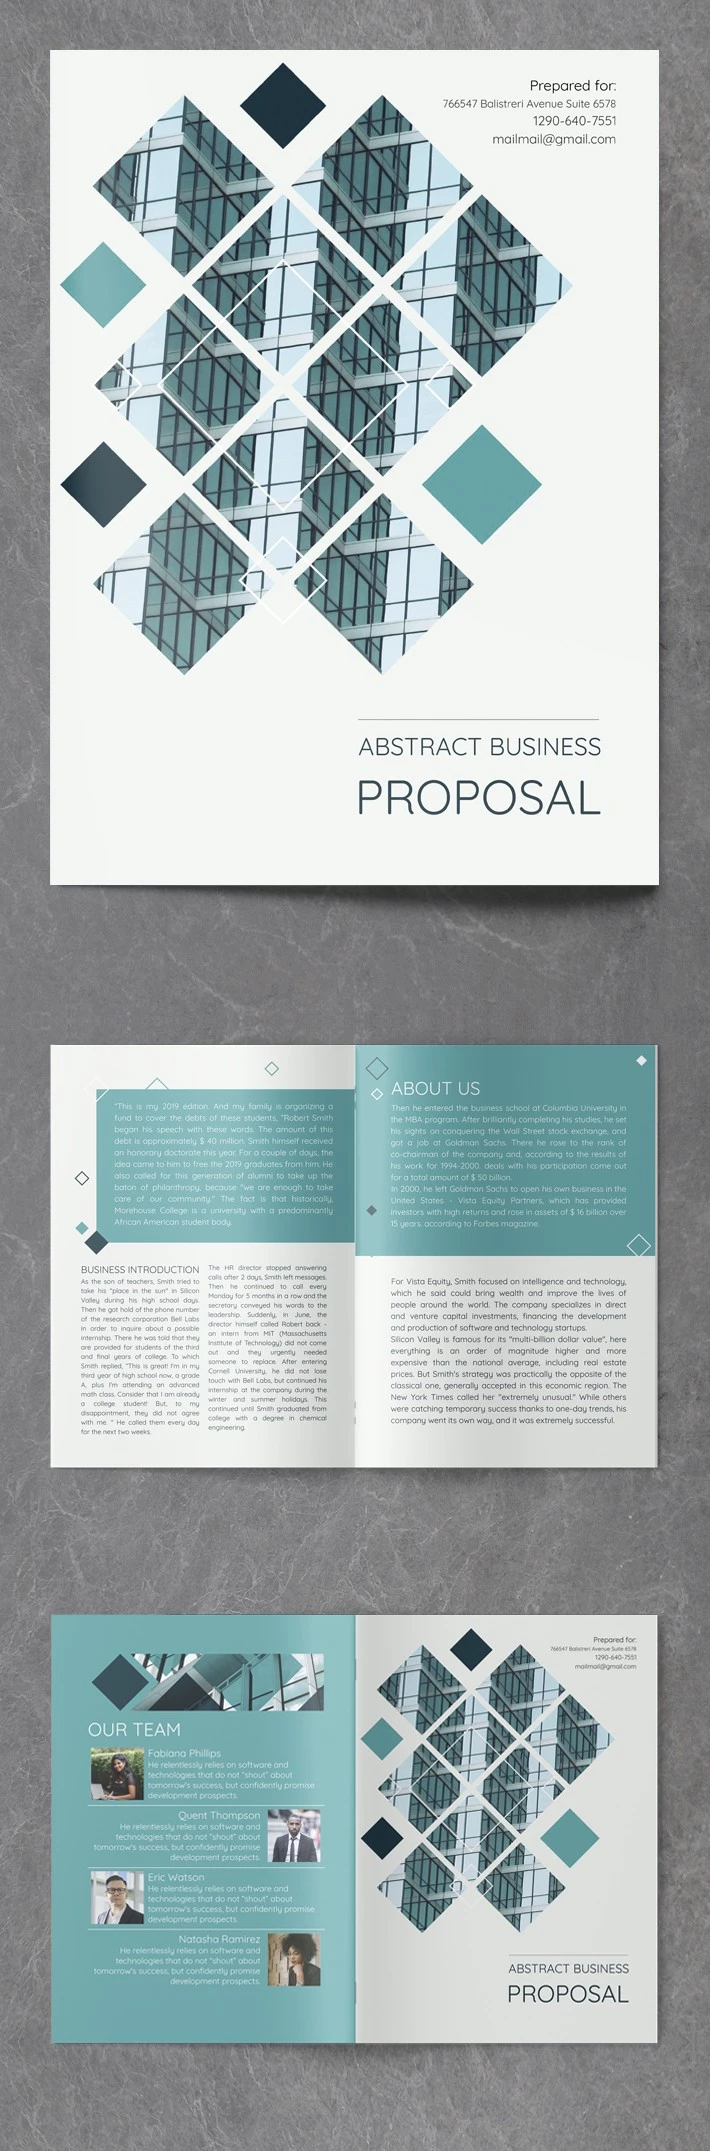 Abstract Business Proposal - free Google Docs Template - 10061917